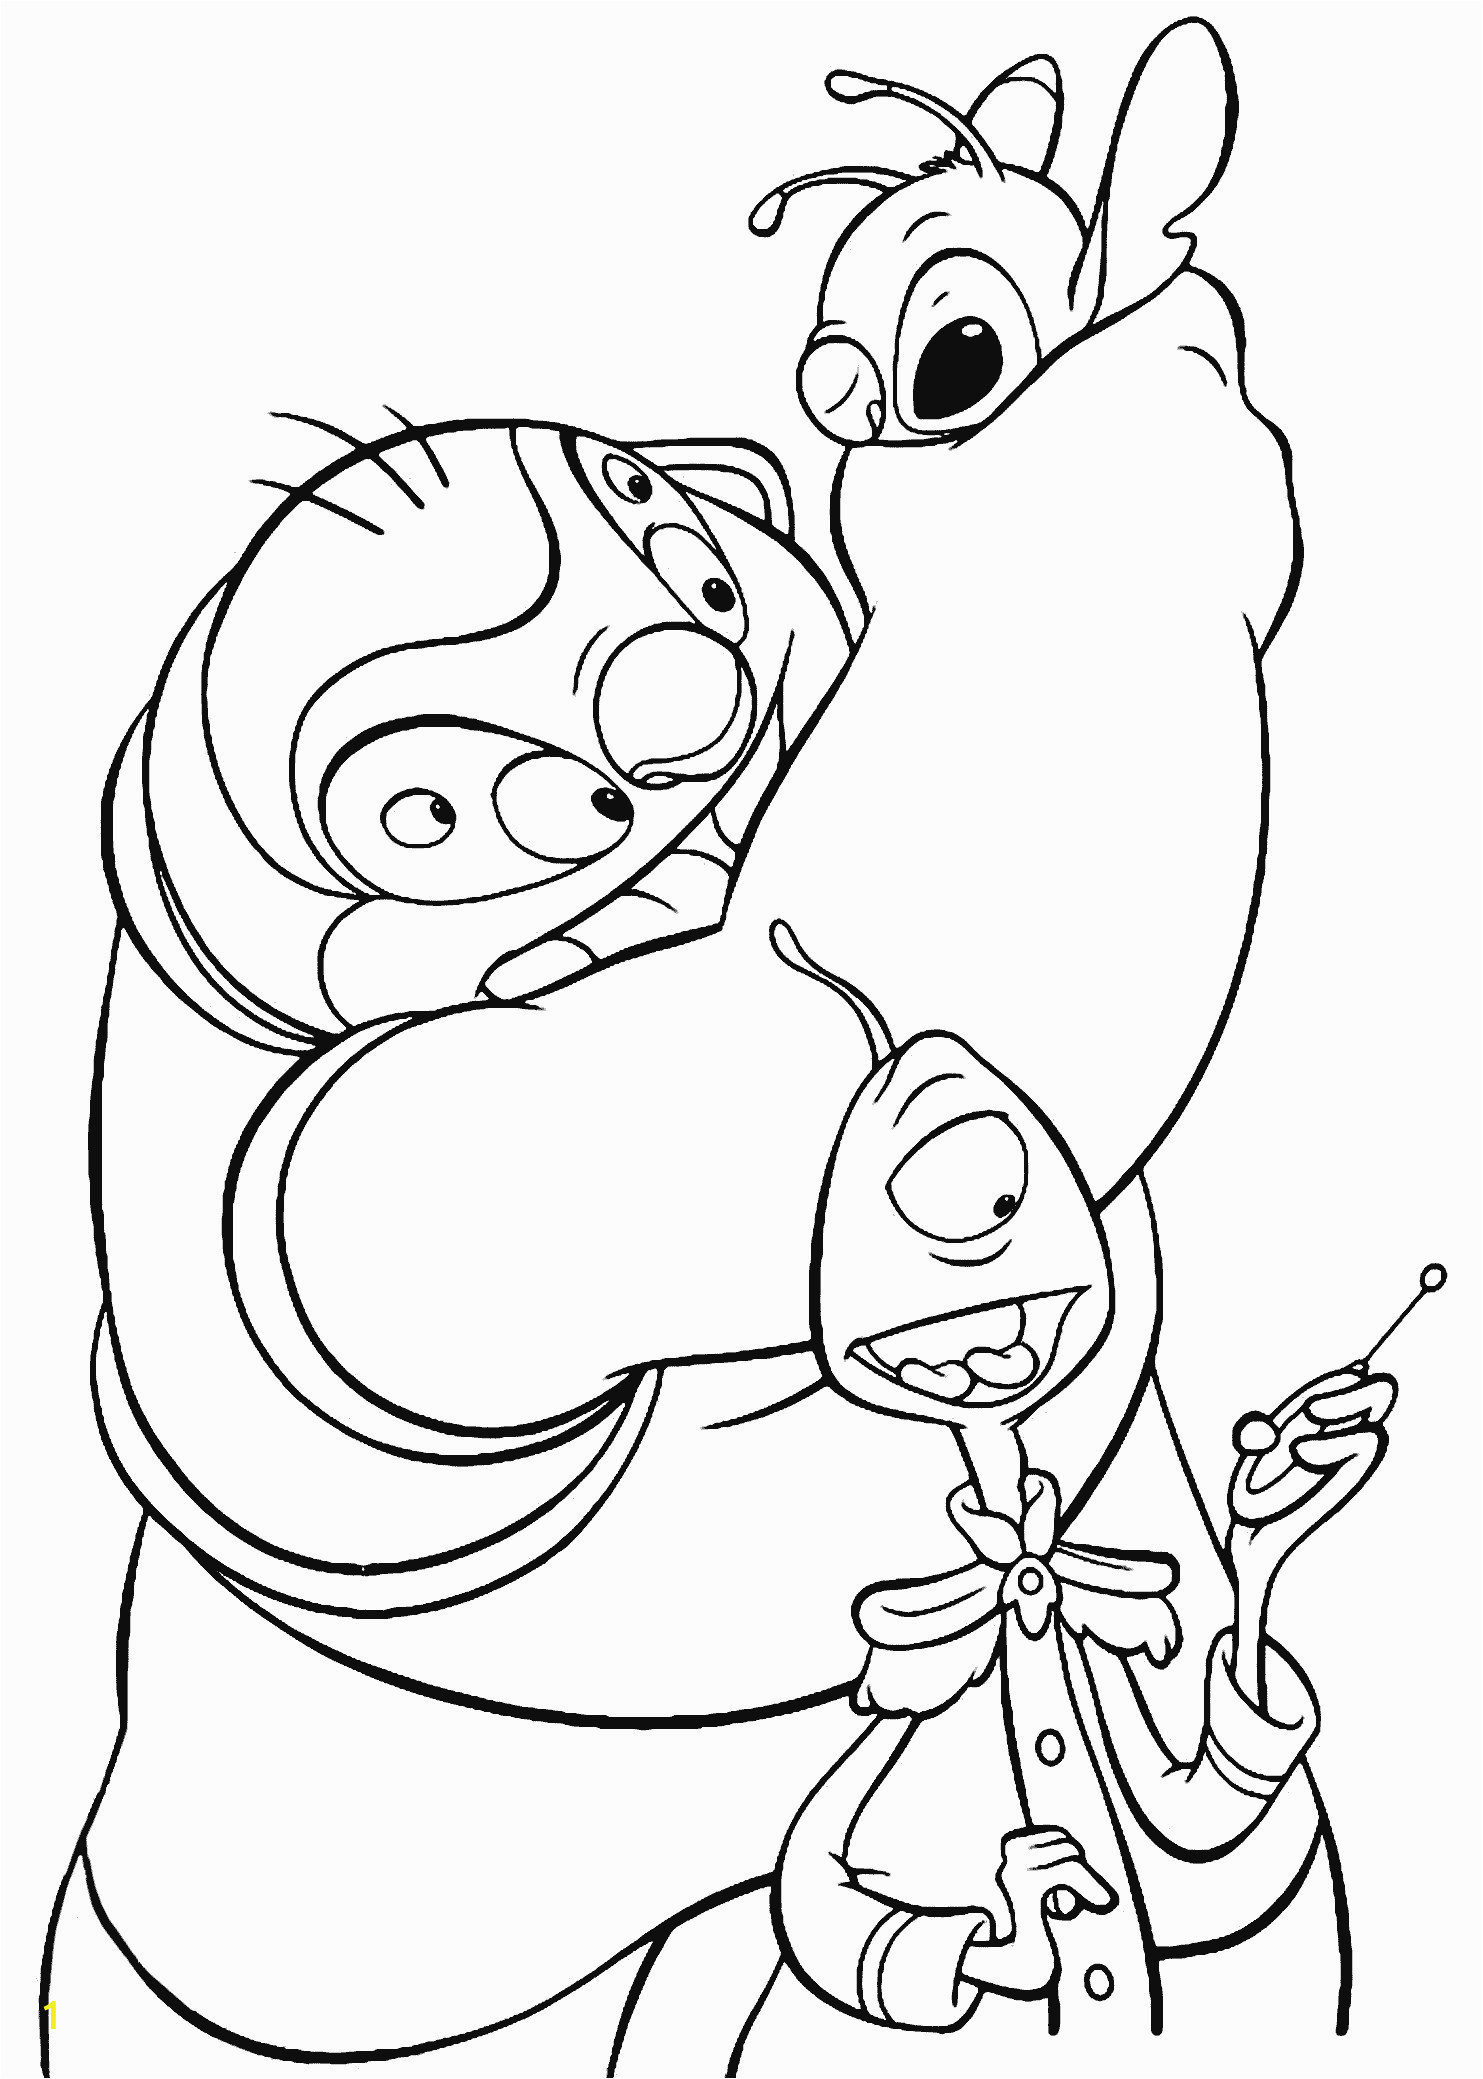 mo willems pigeon coloring page smurf coloring pages new drawing printables 0d archives se telefony of mo willems pigeon coloring page